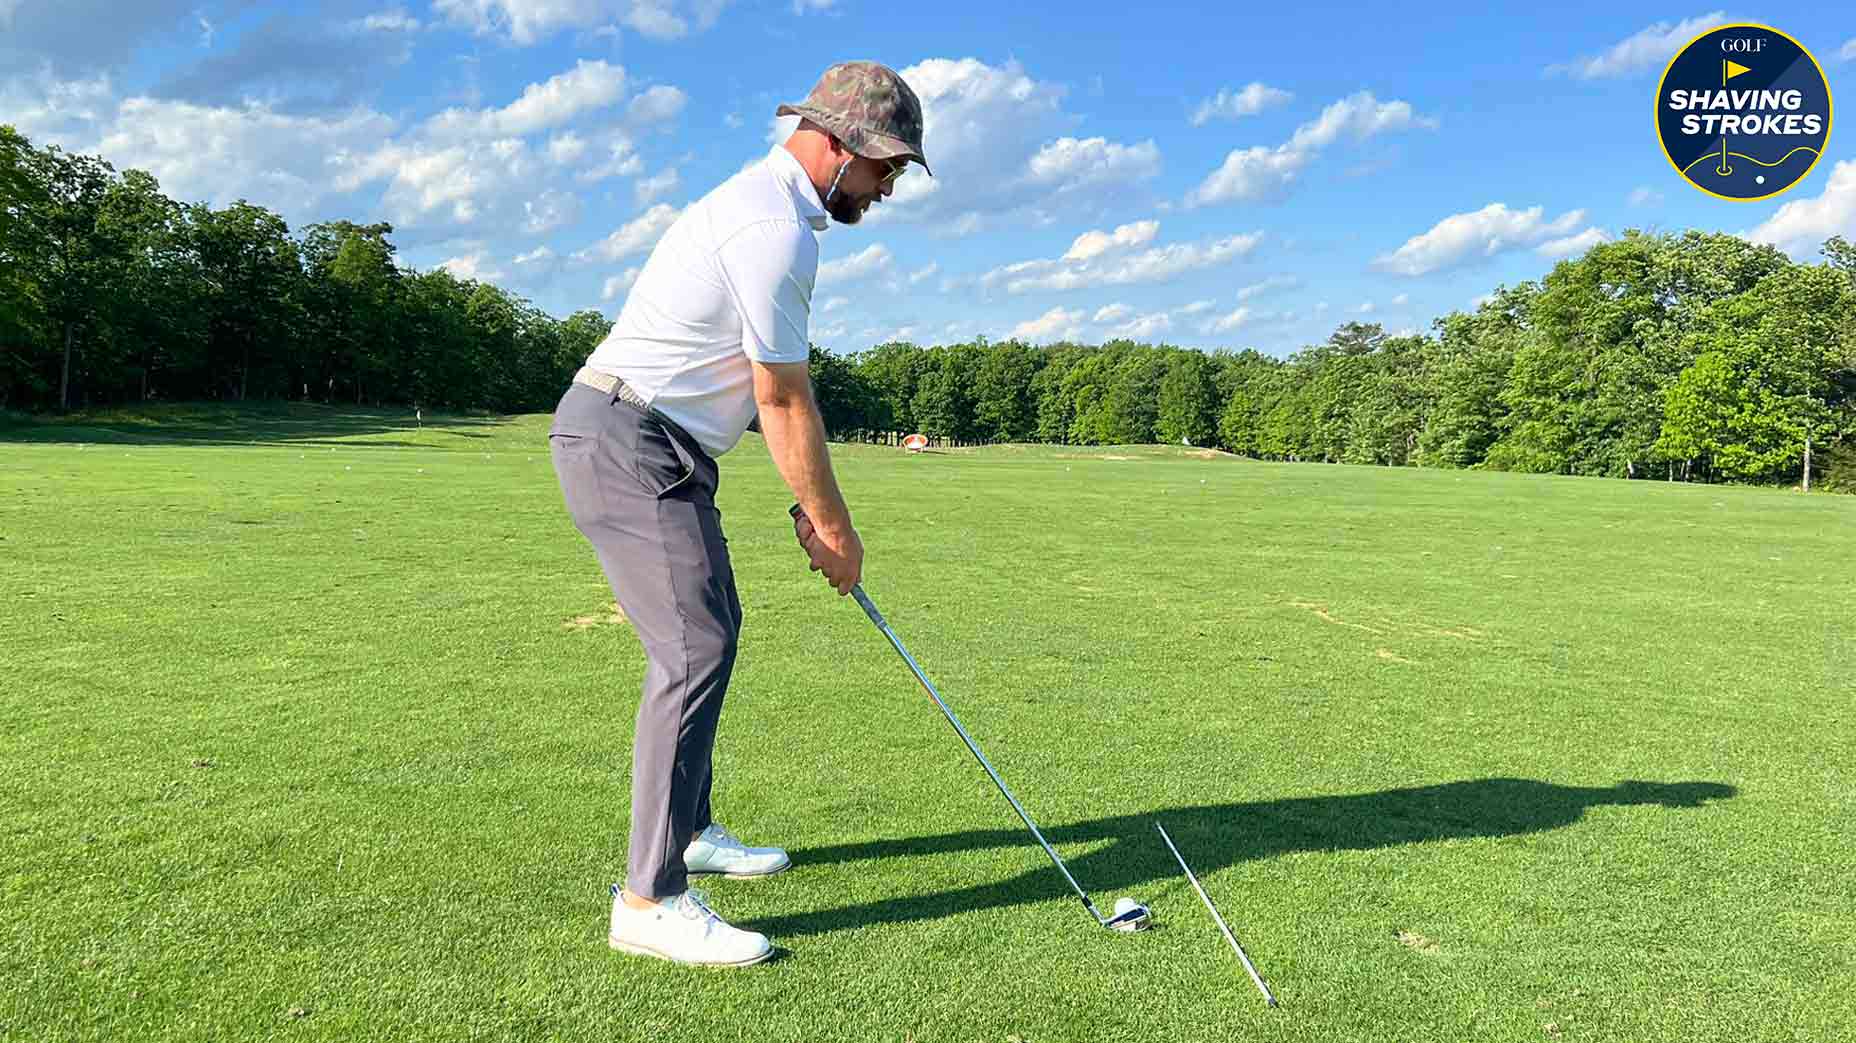 Golf teacher John Hughes shares 7 common mistakes he sees players make on the driving range, and provides some tips on how to fix them